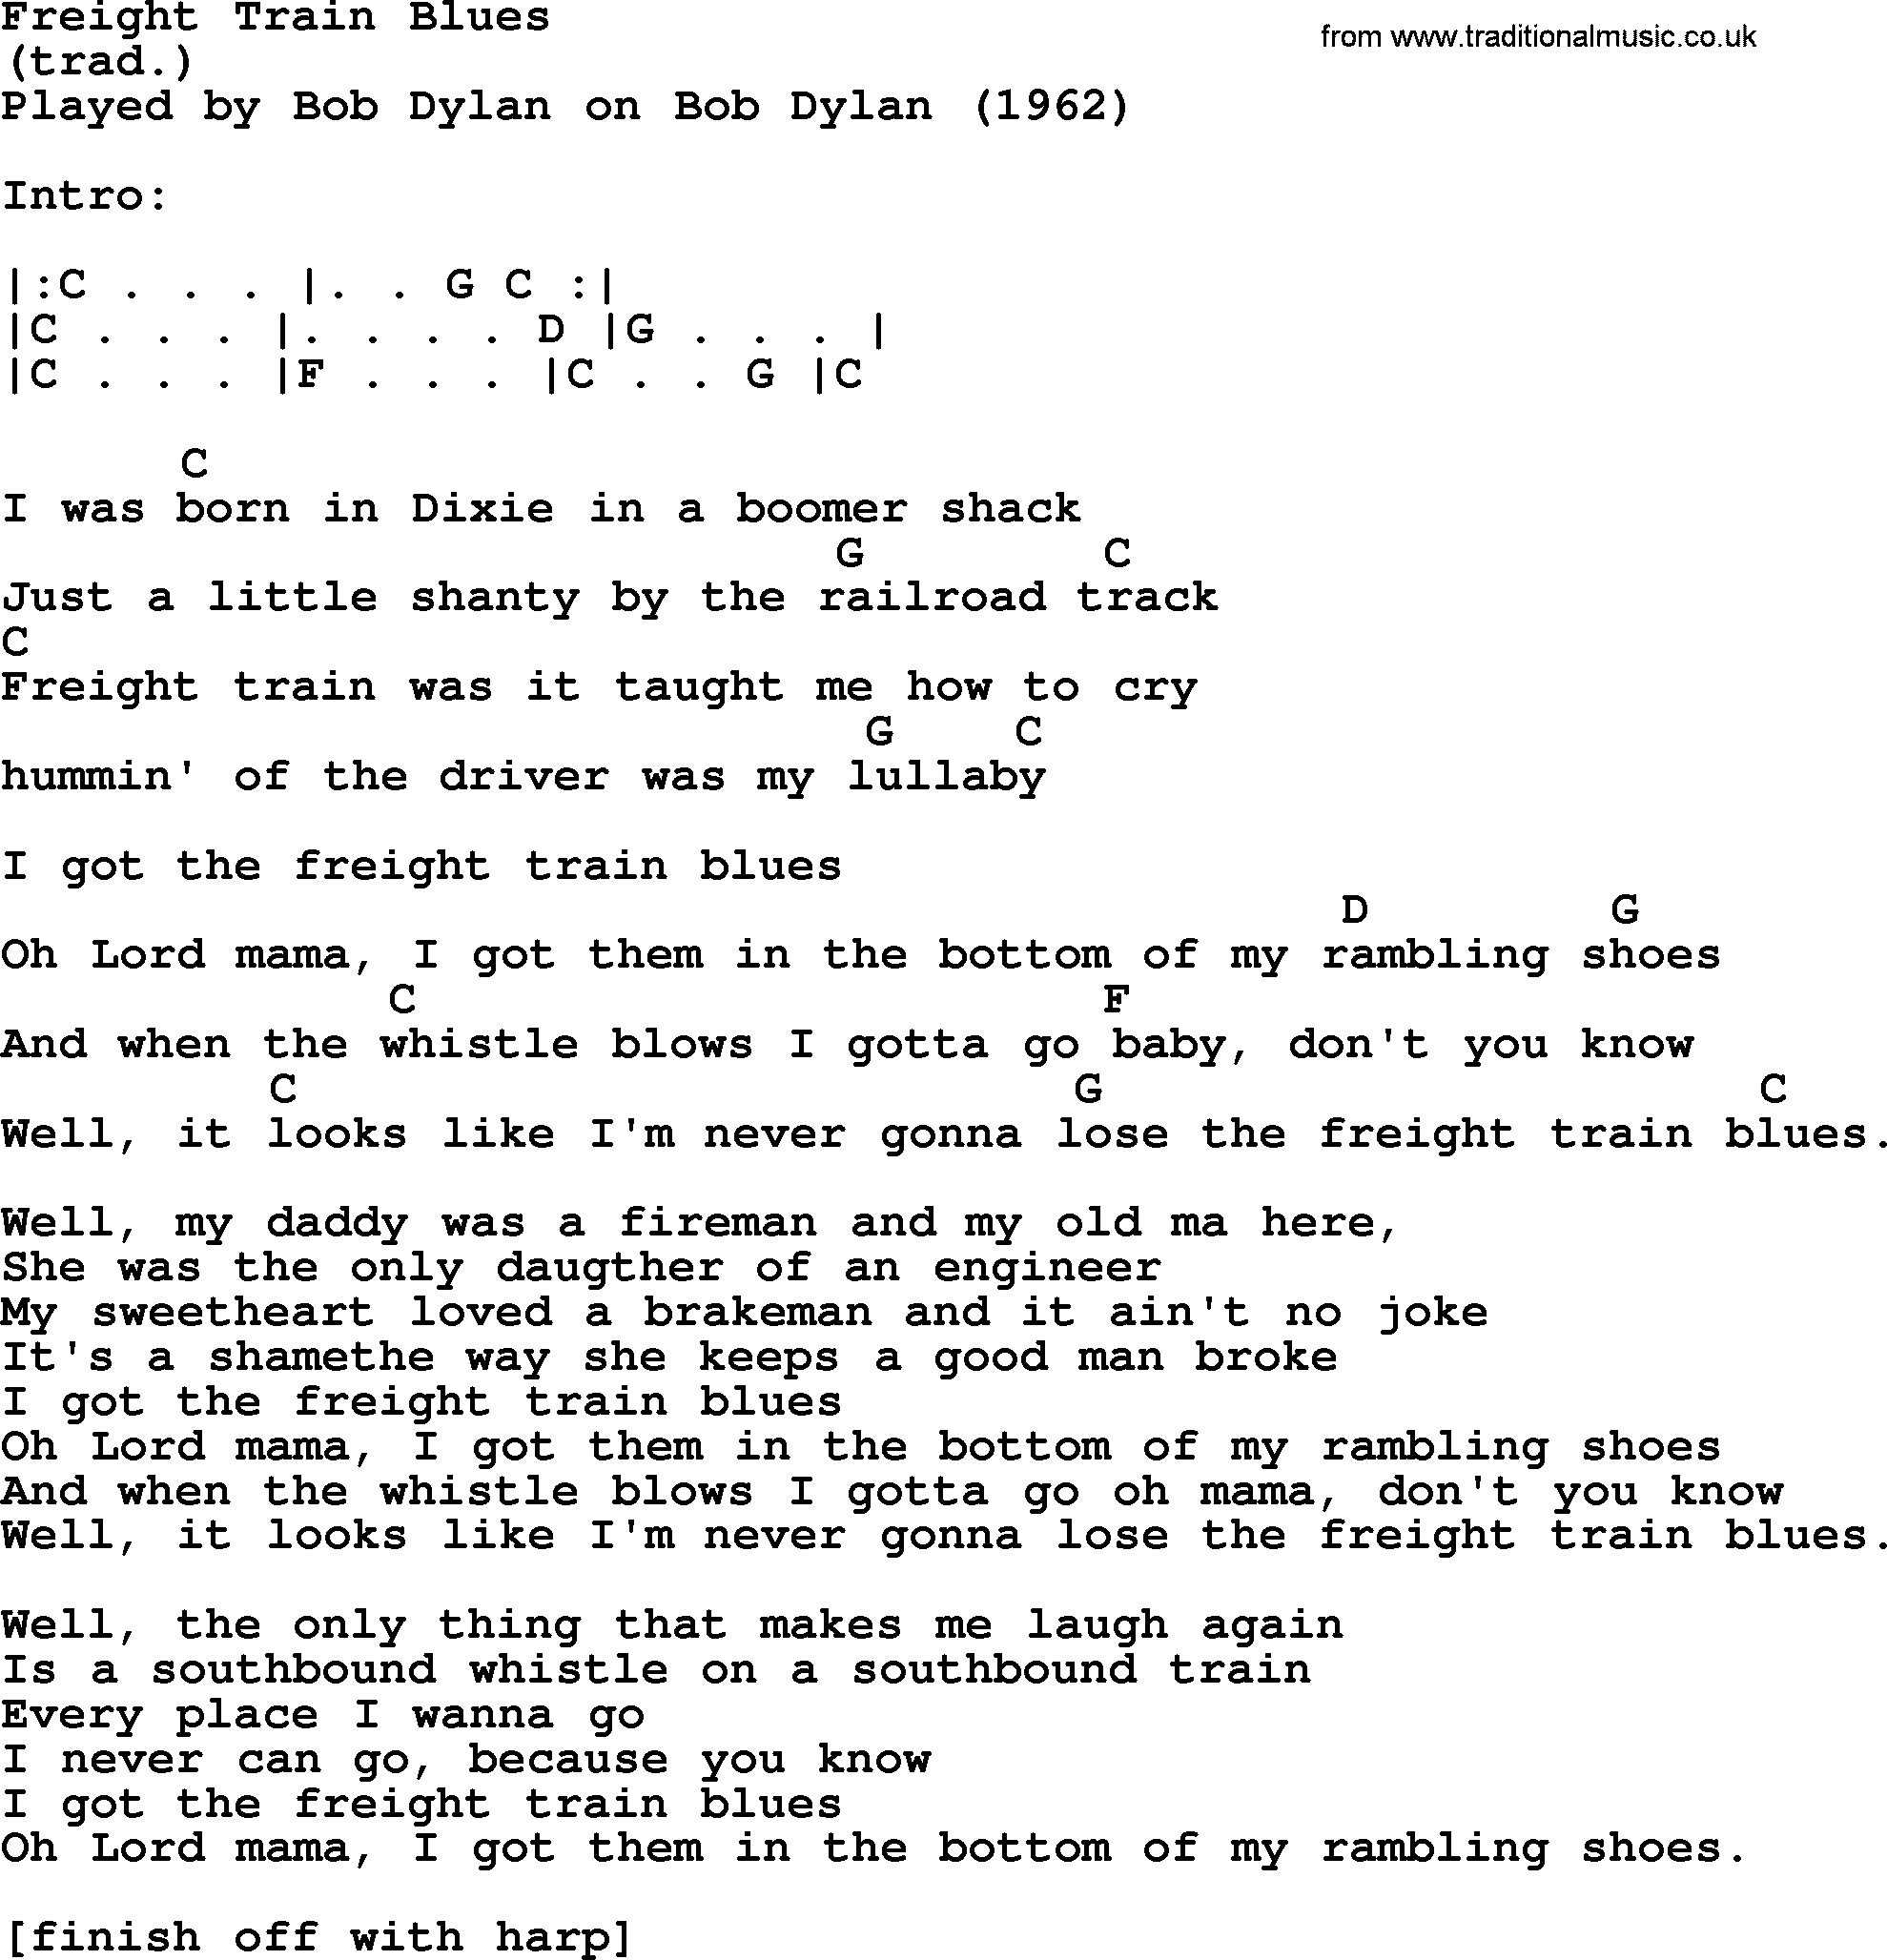 Bob Dylan song, lyrics with chords - Freight Train Blues